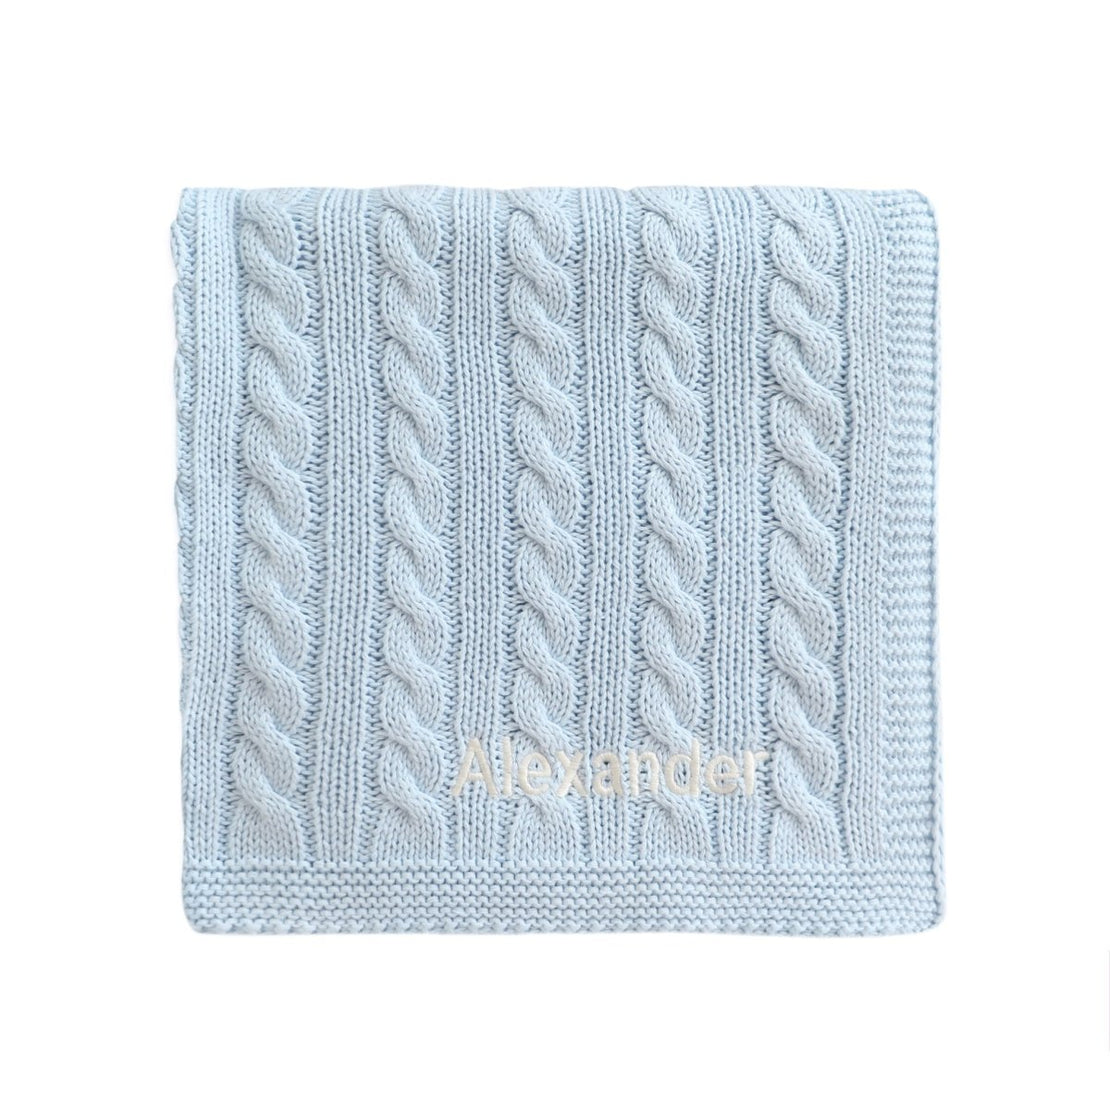 Personalised Luxury Baby Cable Knit Blanket - Pale Blue - LOVINGLY SIGNED (HK)